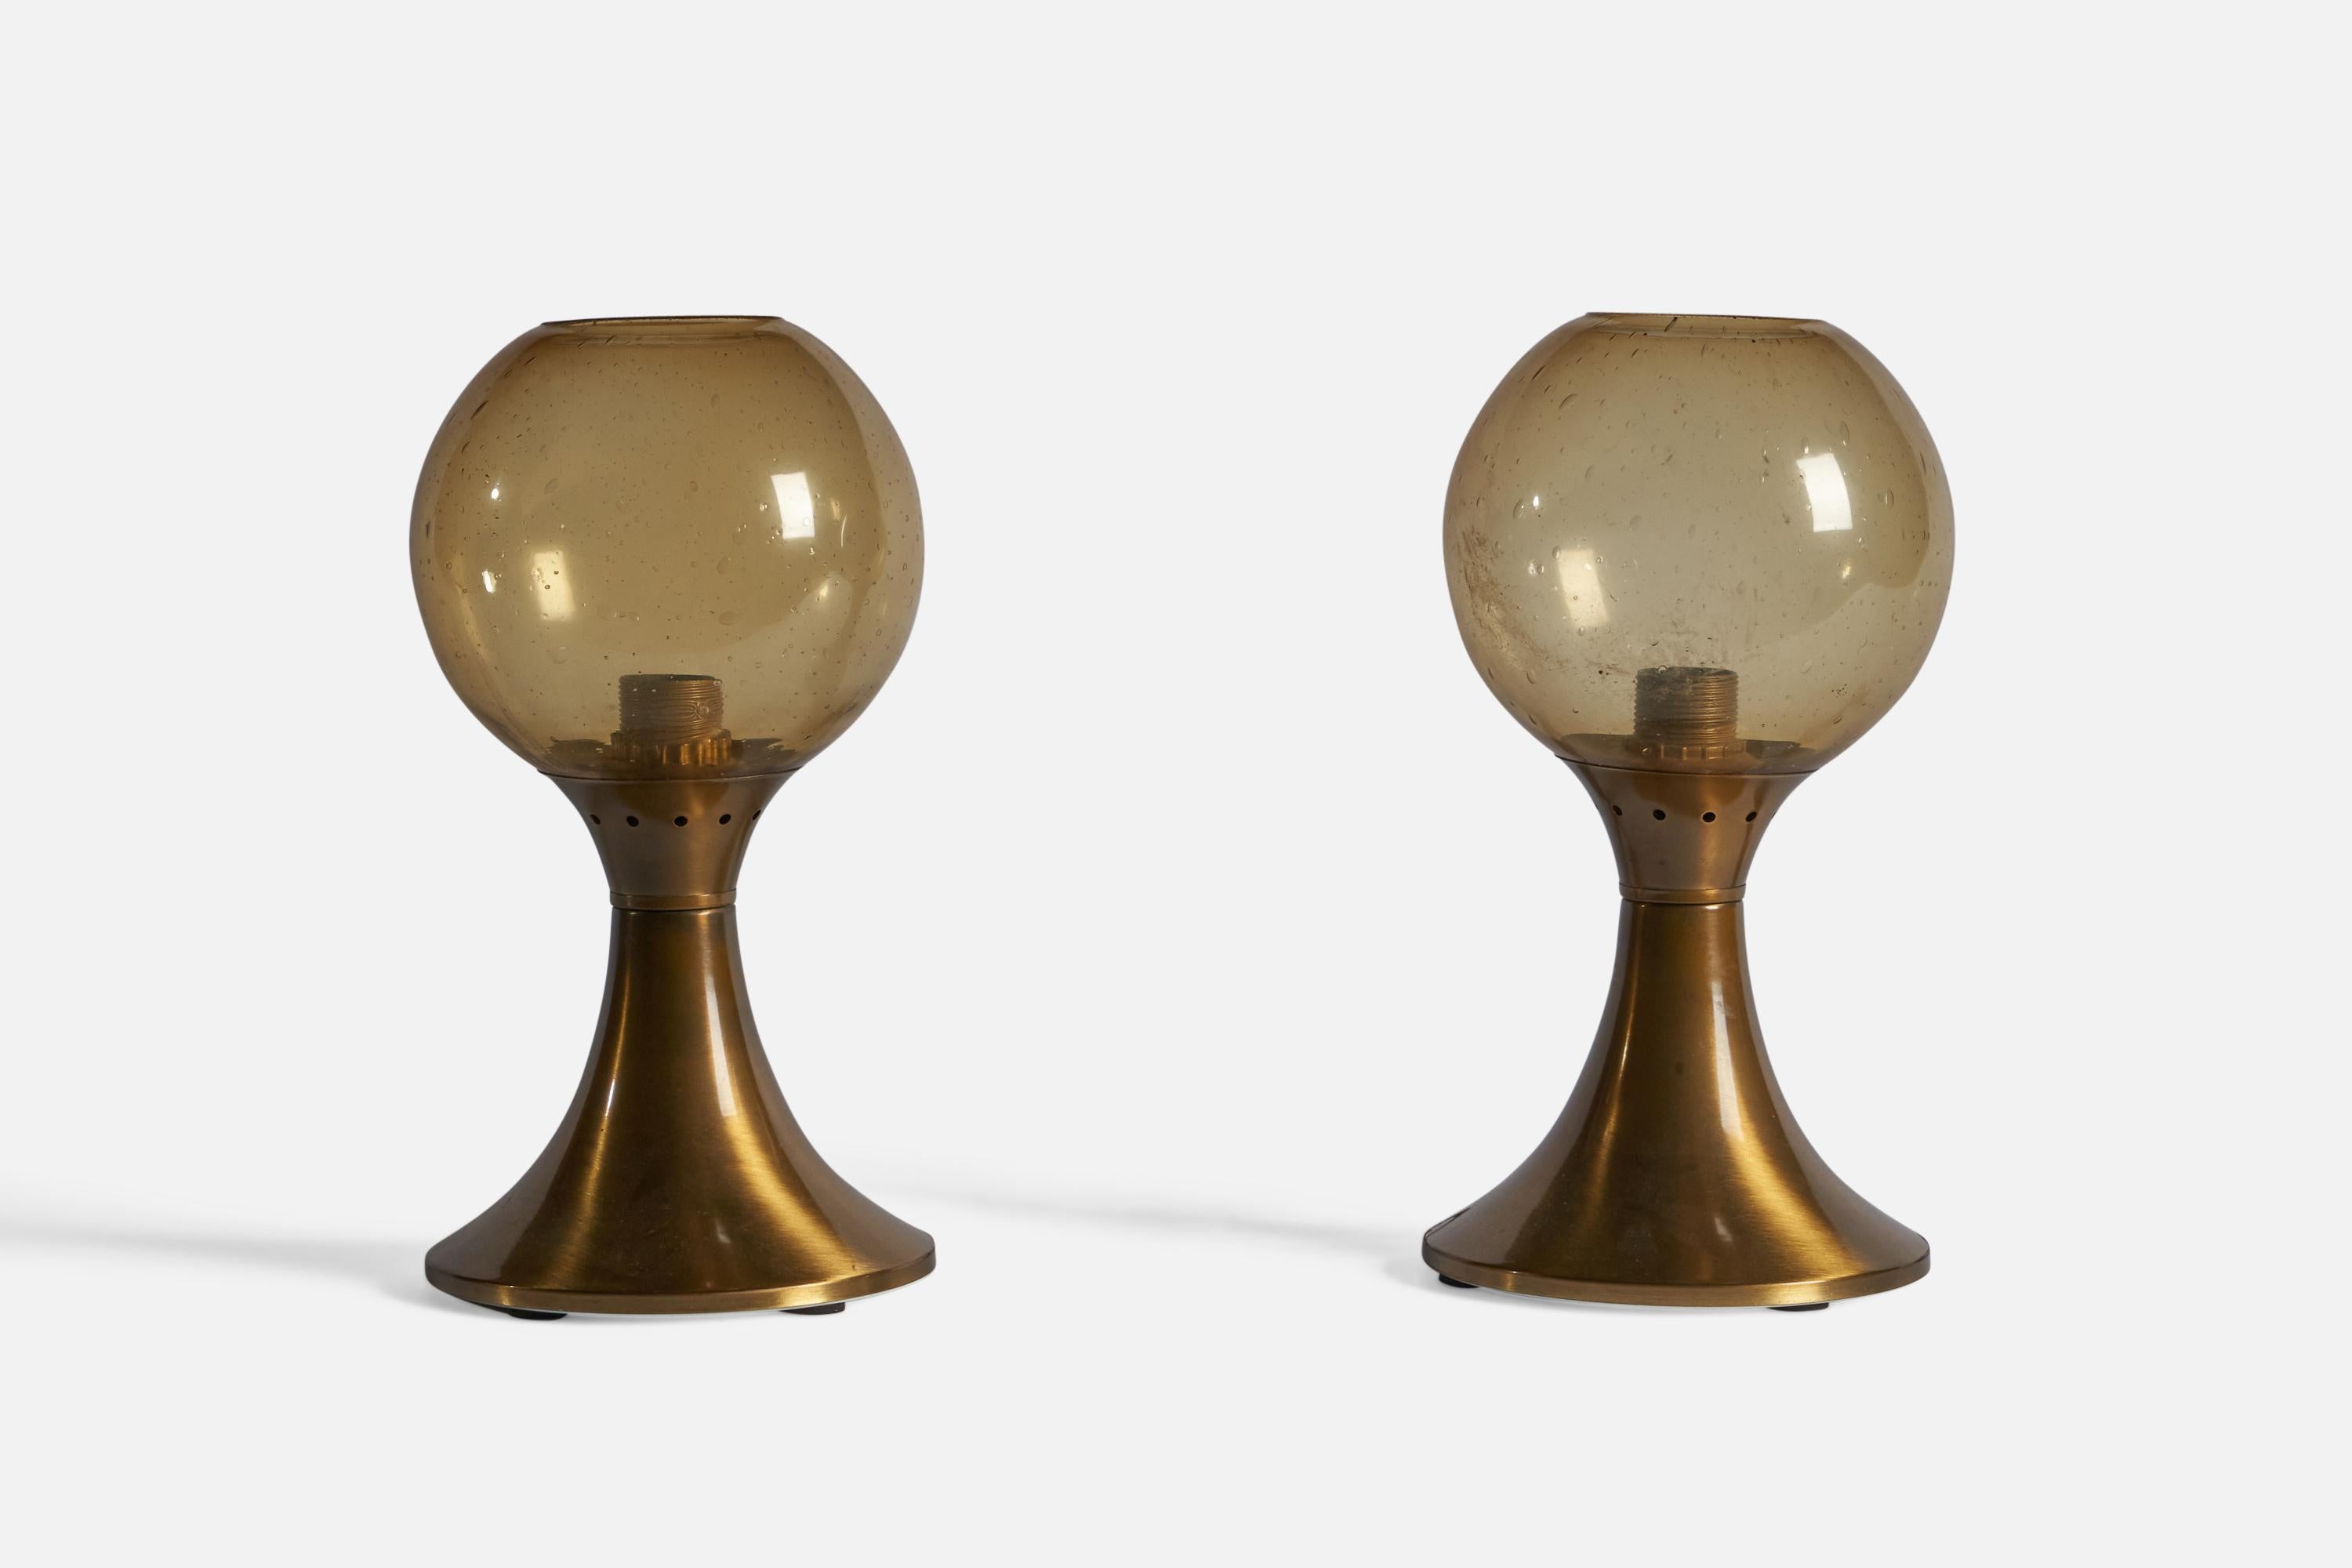 A pair of brass and yellow glass table lamps, designed and produced in Italy, 1970s.

Overall Dimensions: 14.75